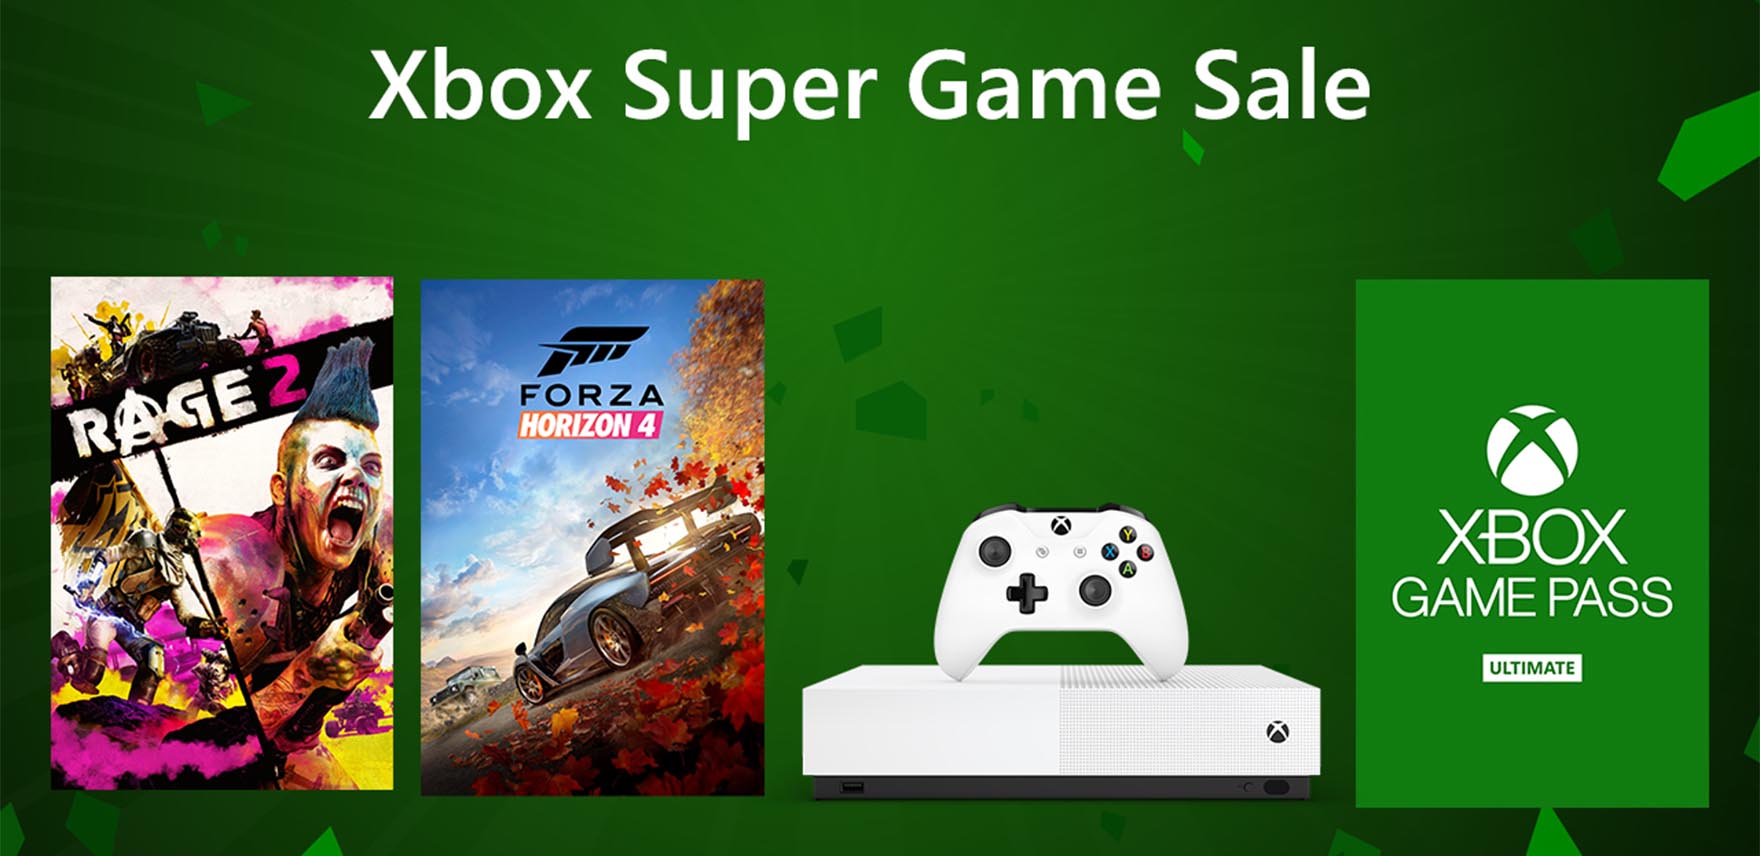 Xbox Super Game Sale product logos